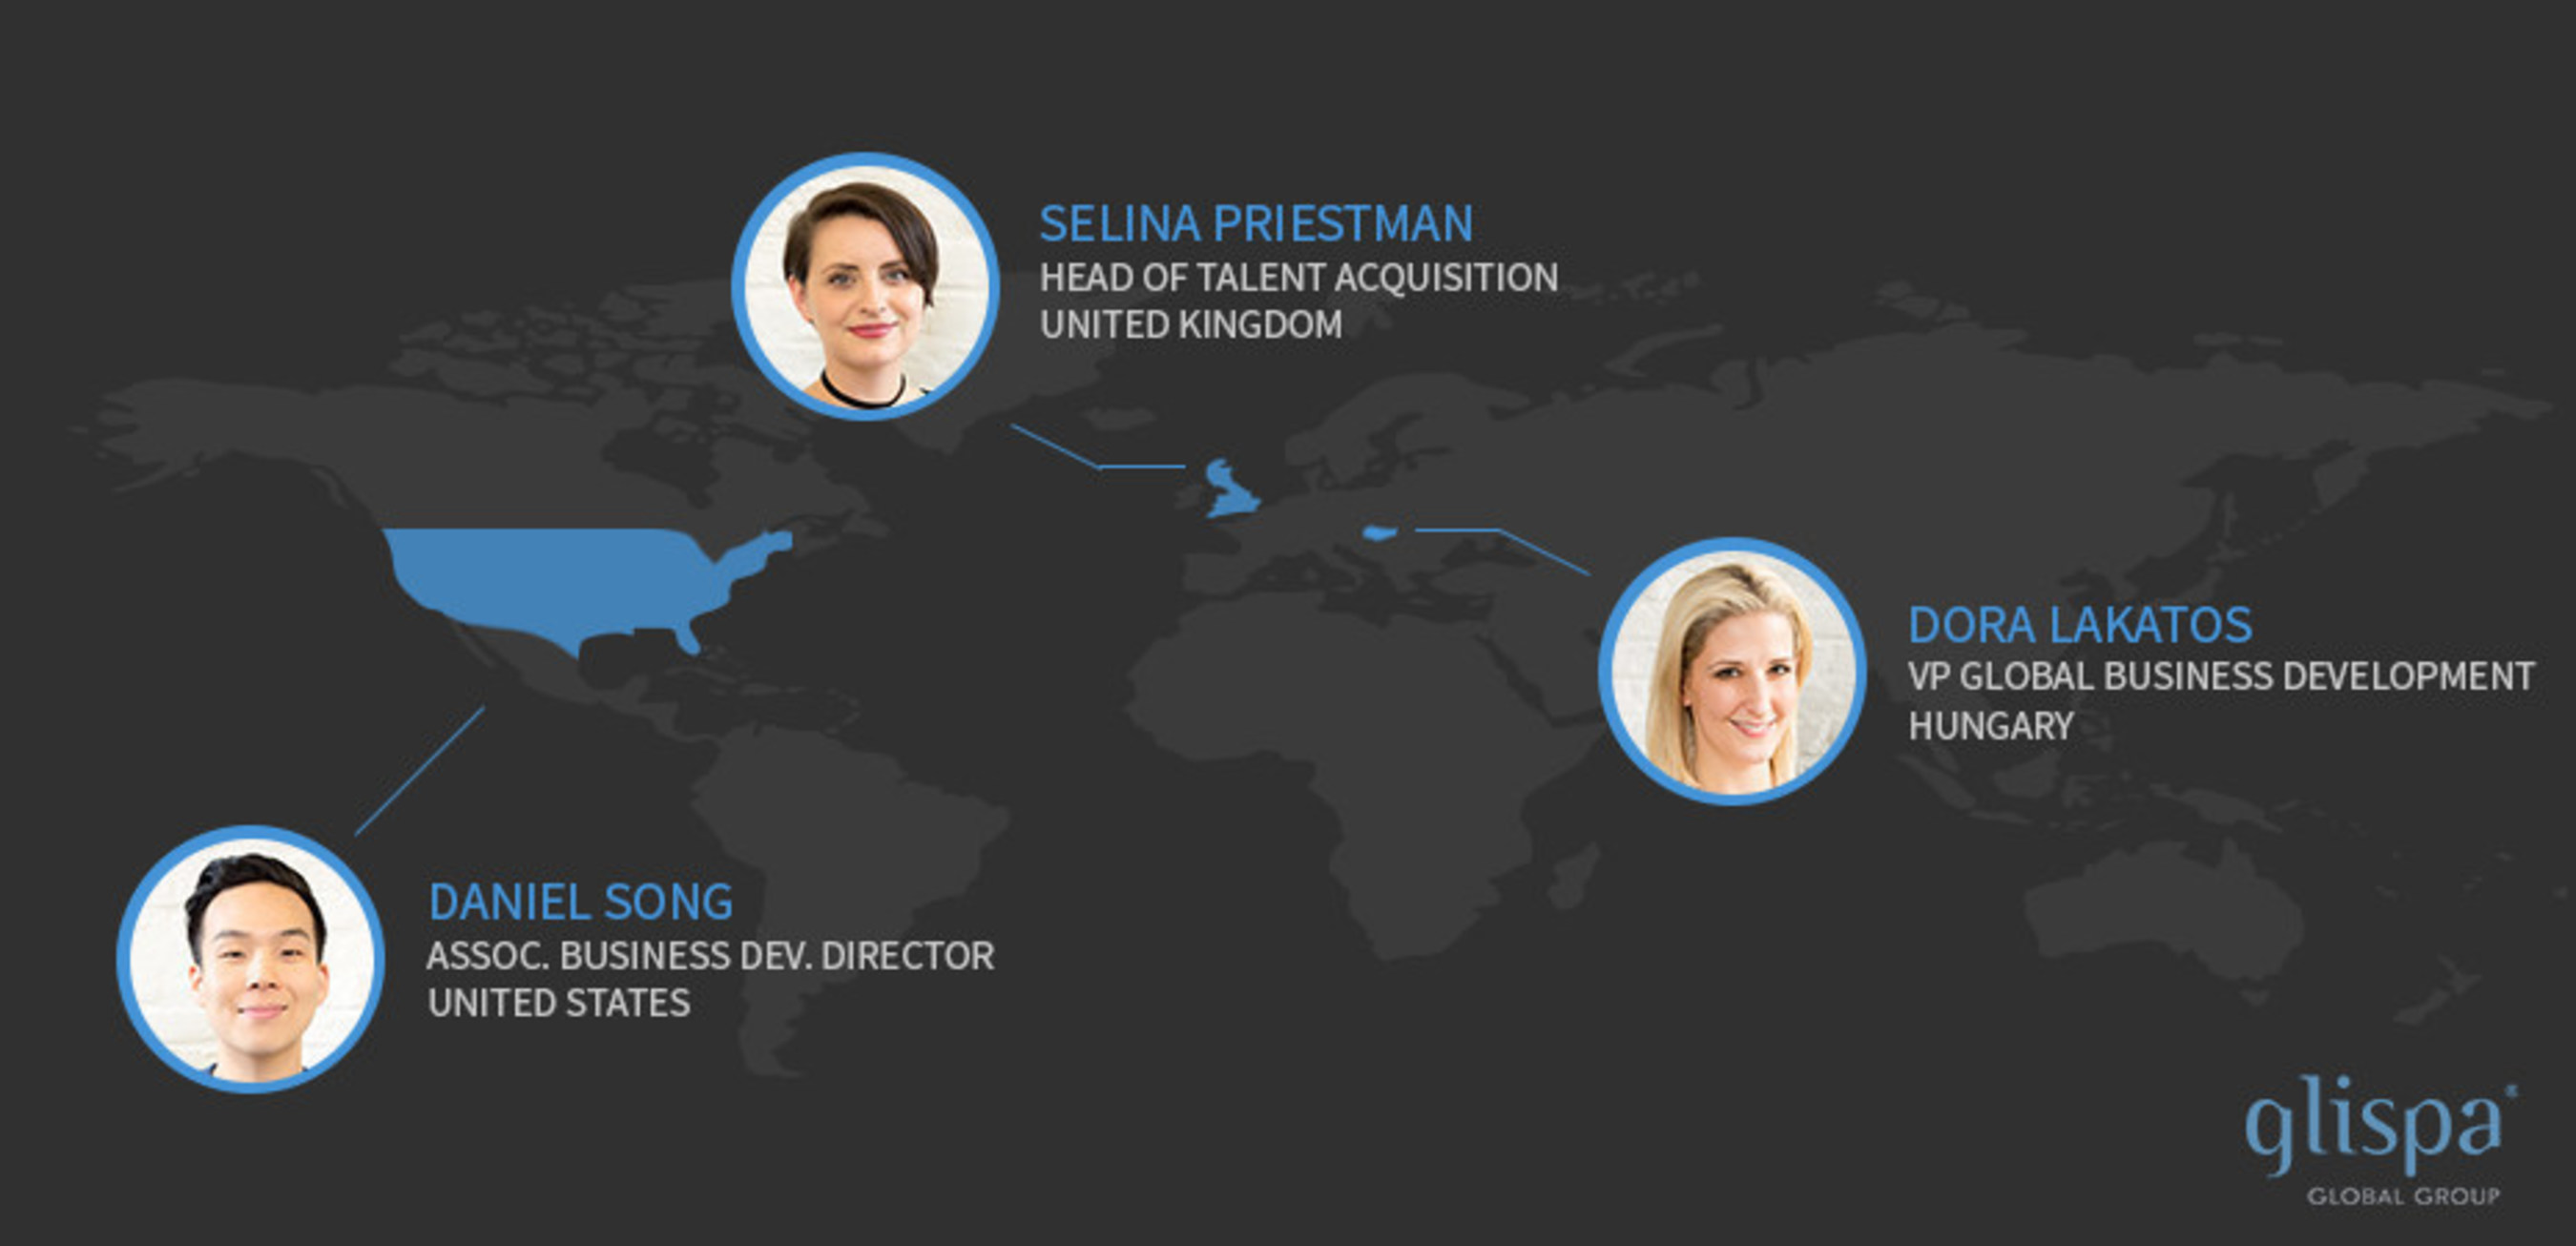 We are excited to welcome Dora Lakatos, Selina Priestman and Daniel Song to the glispa Team.